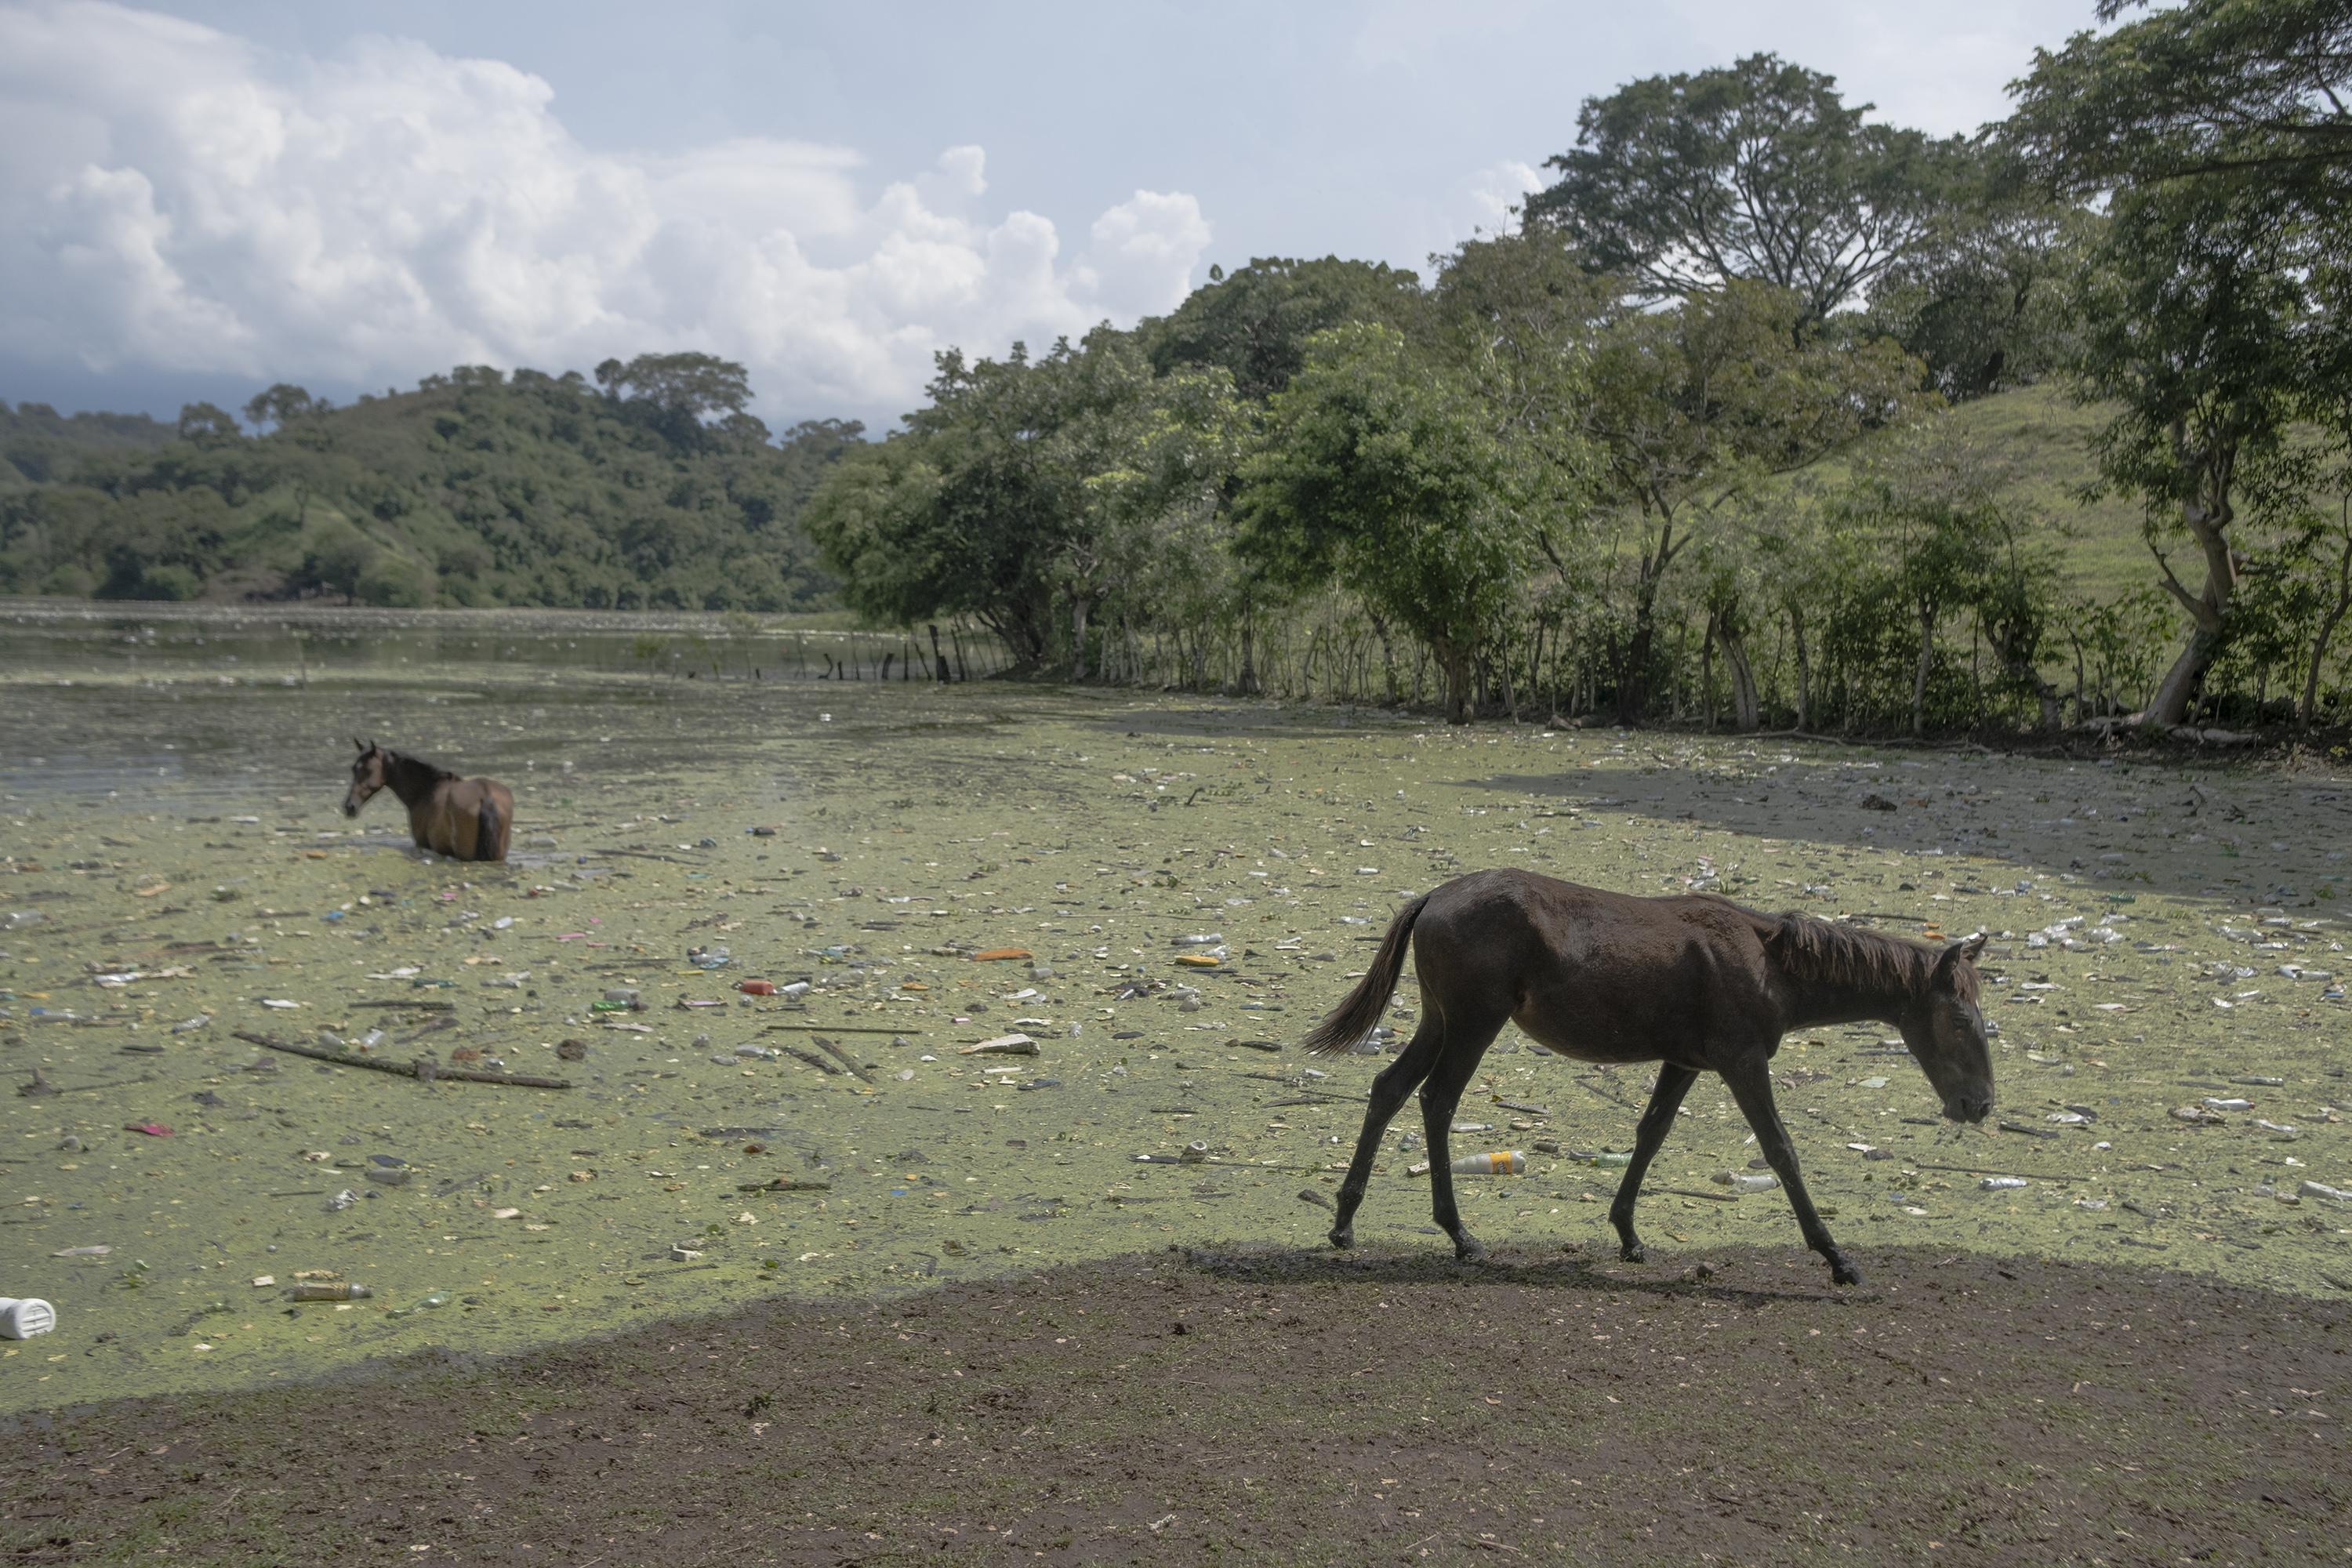 Members of Potonico’s Piedra del Idioma cooperative of farmers and ranchers note that illnesses among their horses and cows have increased. They say that their cattle are experiencing stomach infections from drinking water containing pieces of plastic, which the animals are unable to expel.